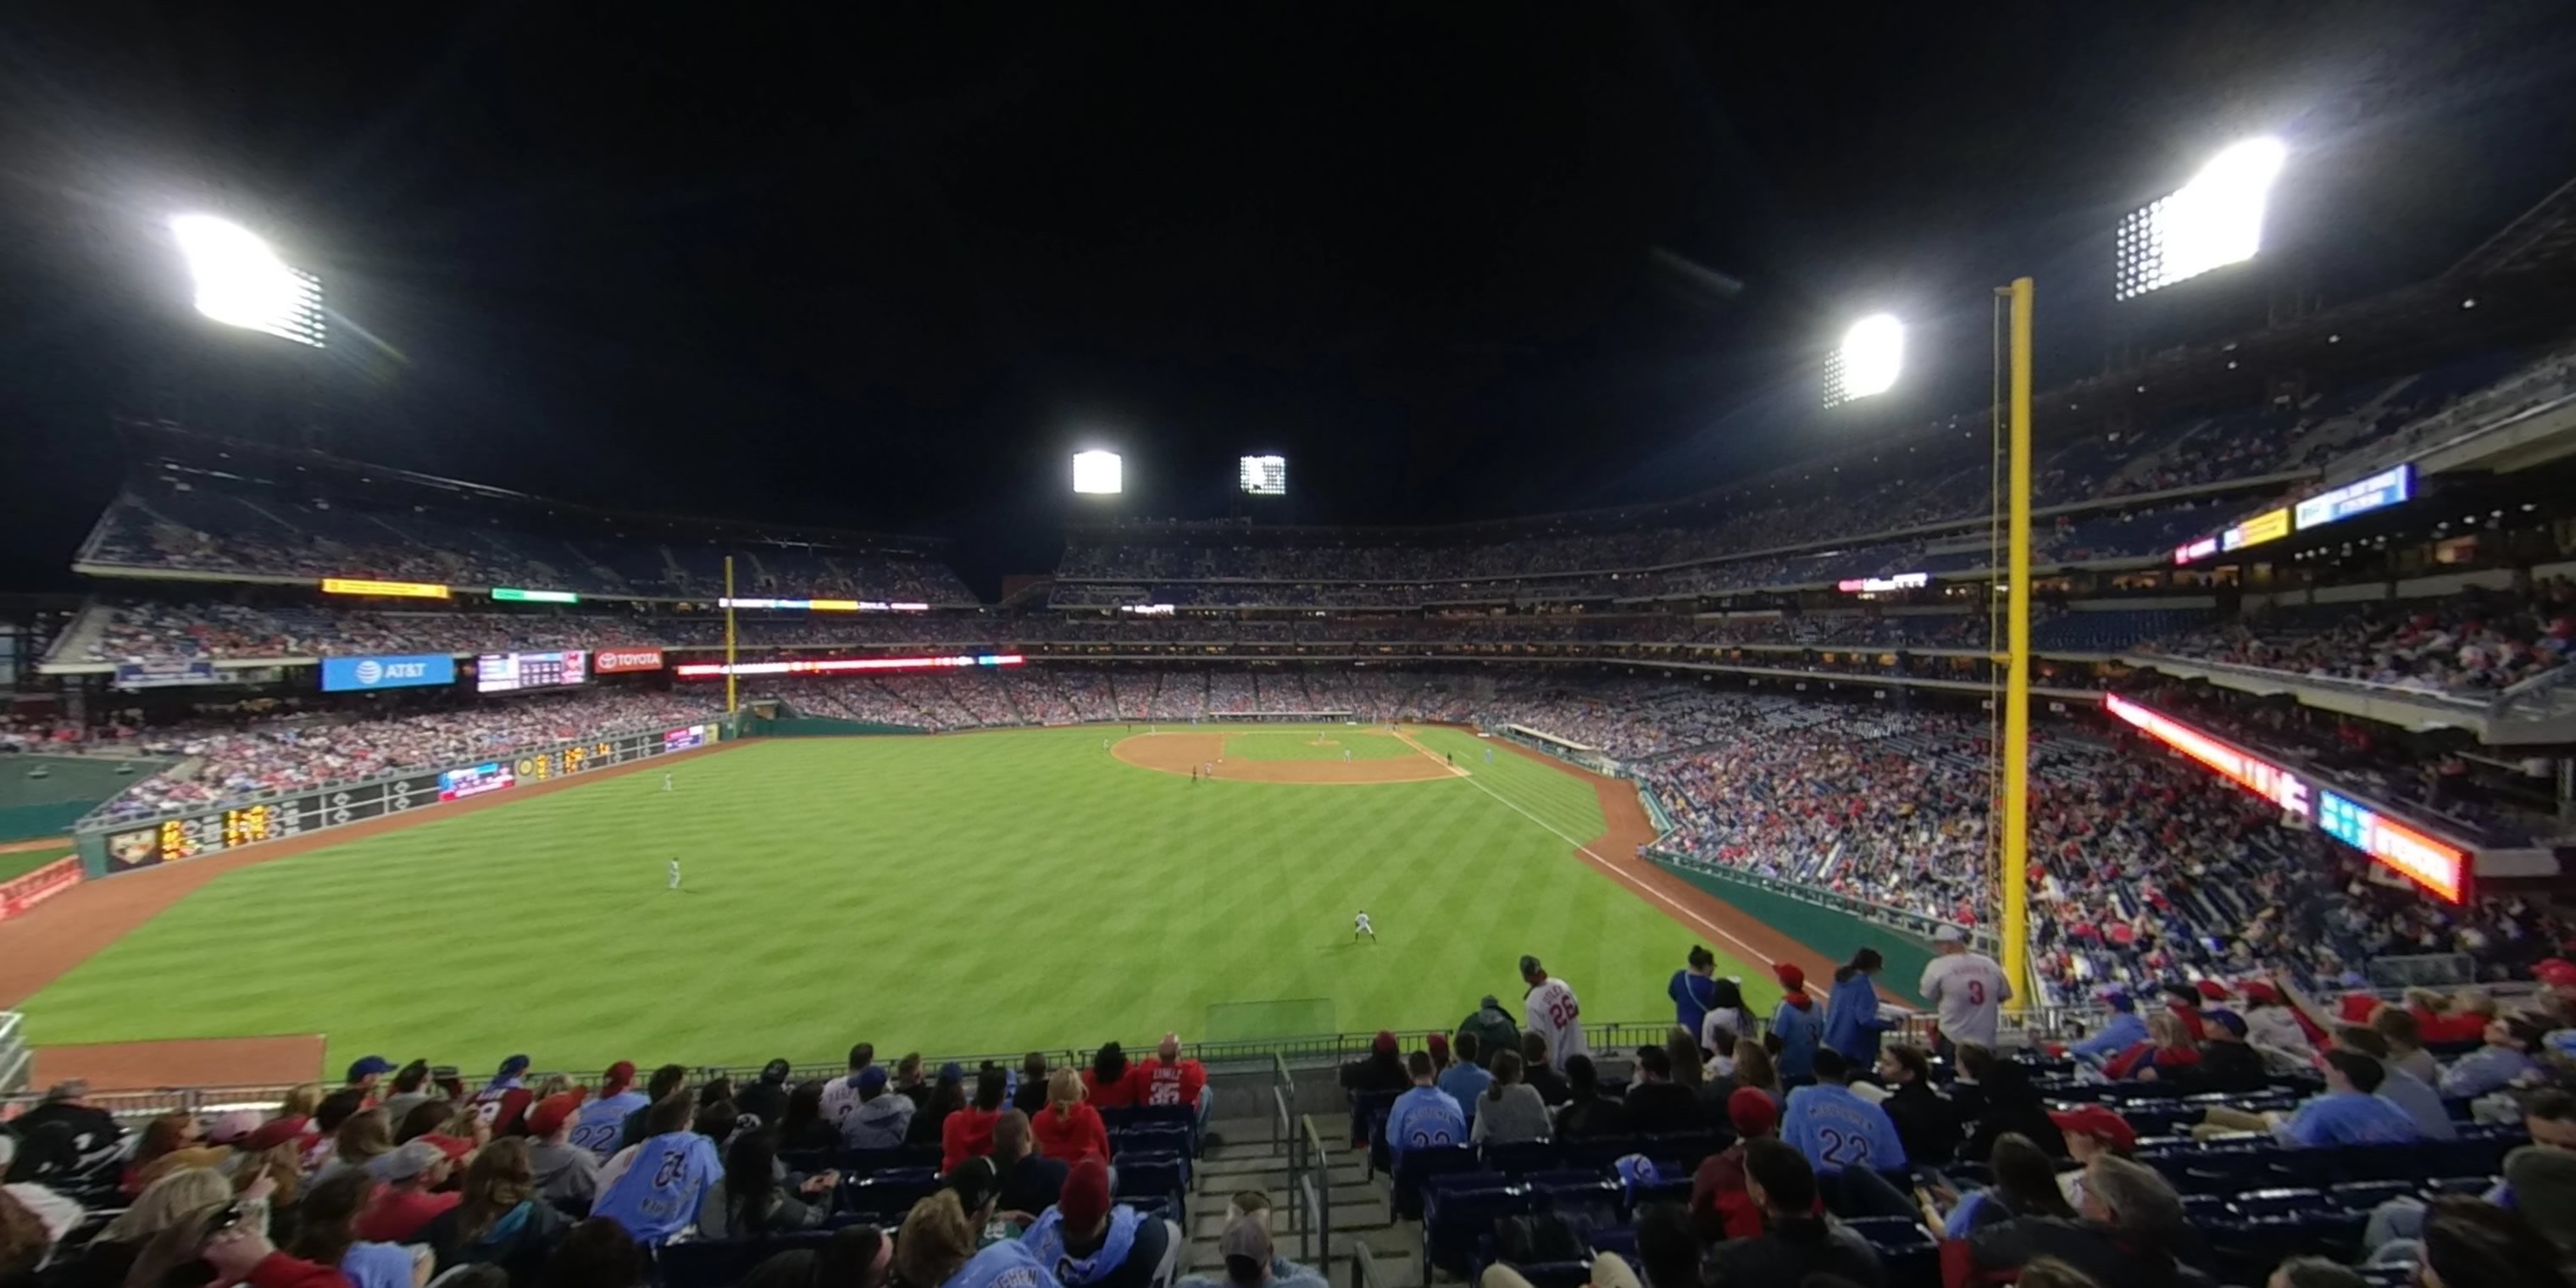 section 242 panoramic seat view  for baseball - citizens bank park